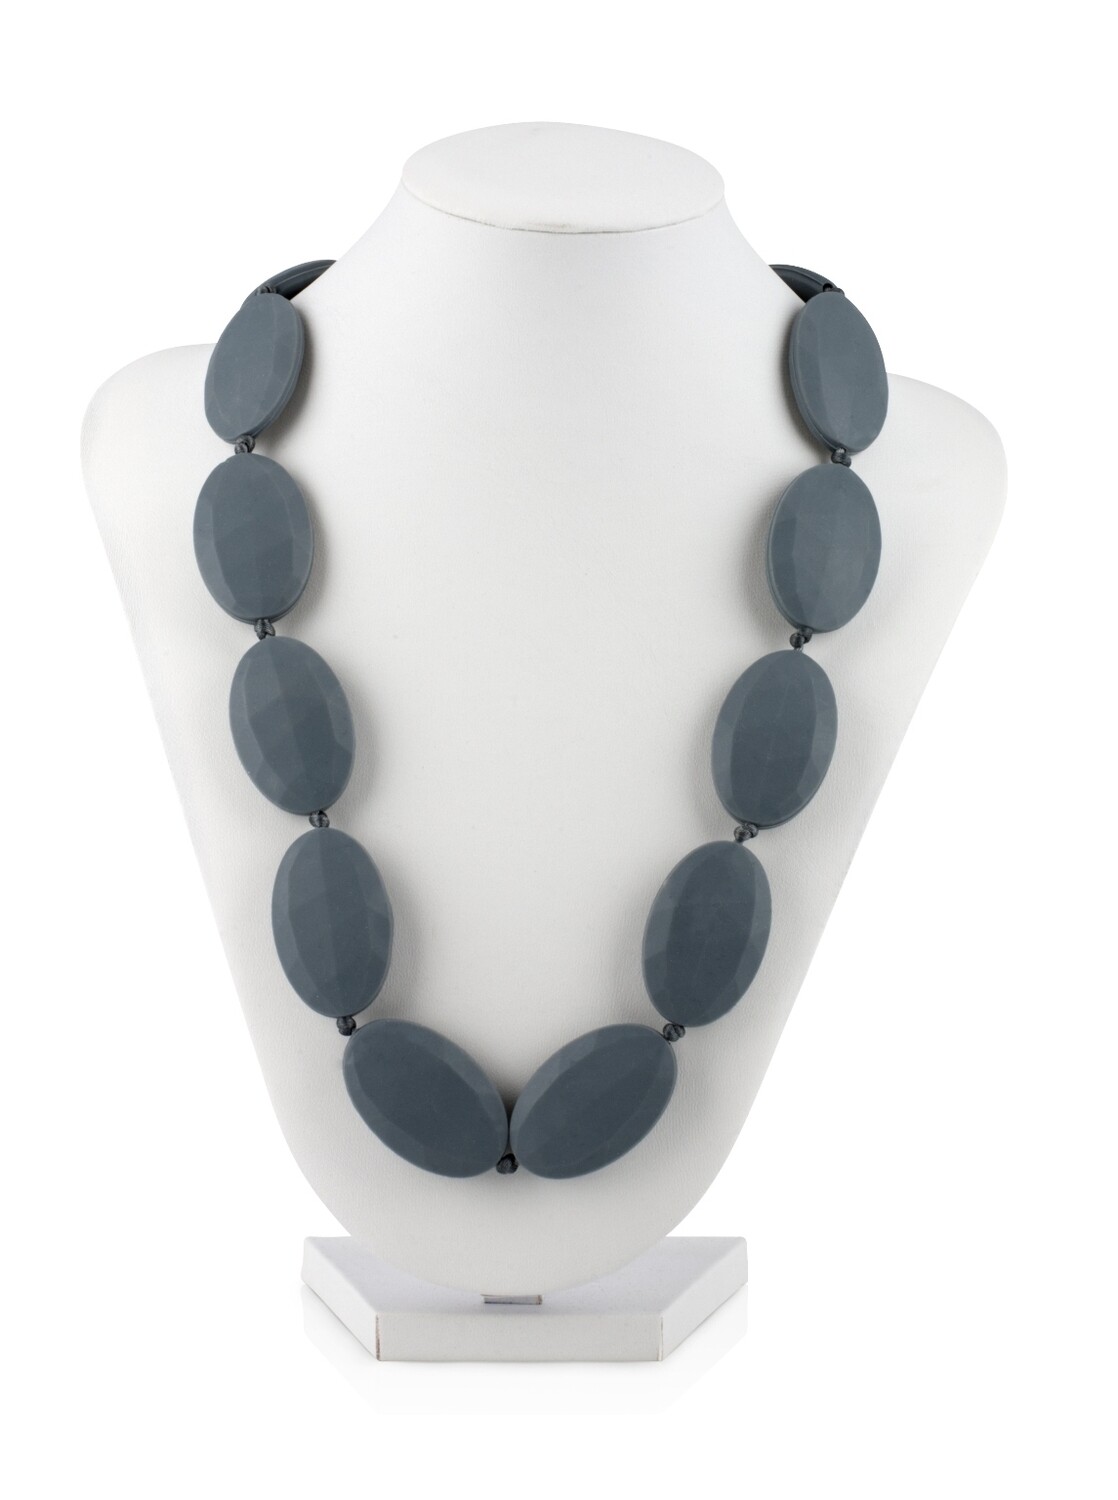 . Case of [12] Nuby Teething Oval Beads Necklace - Grey .